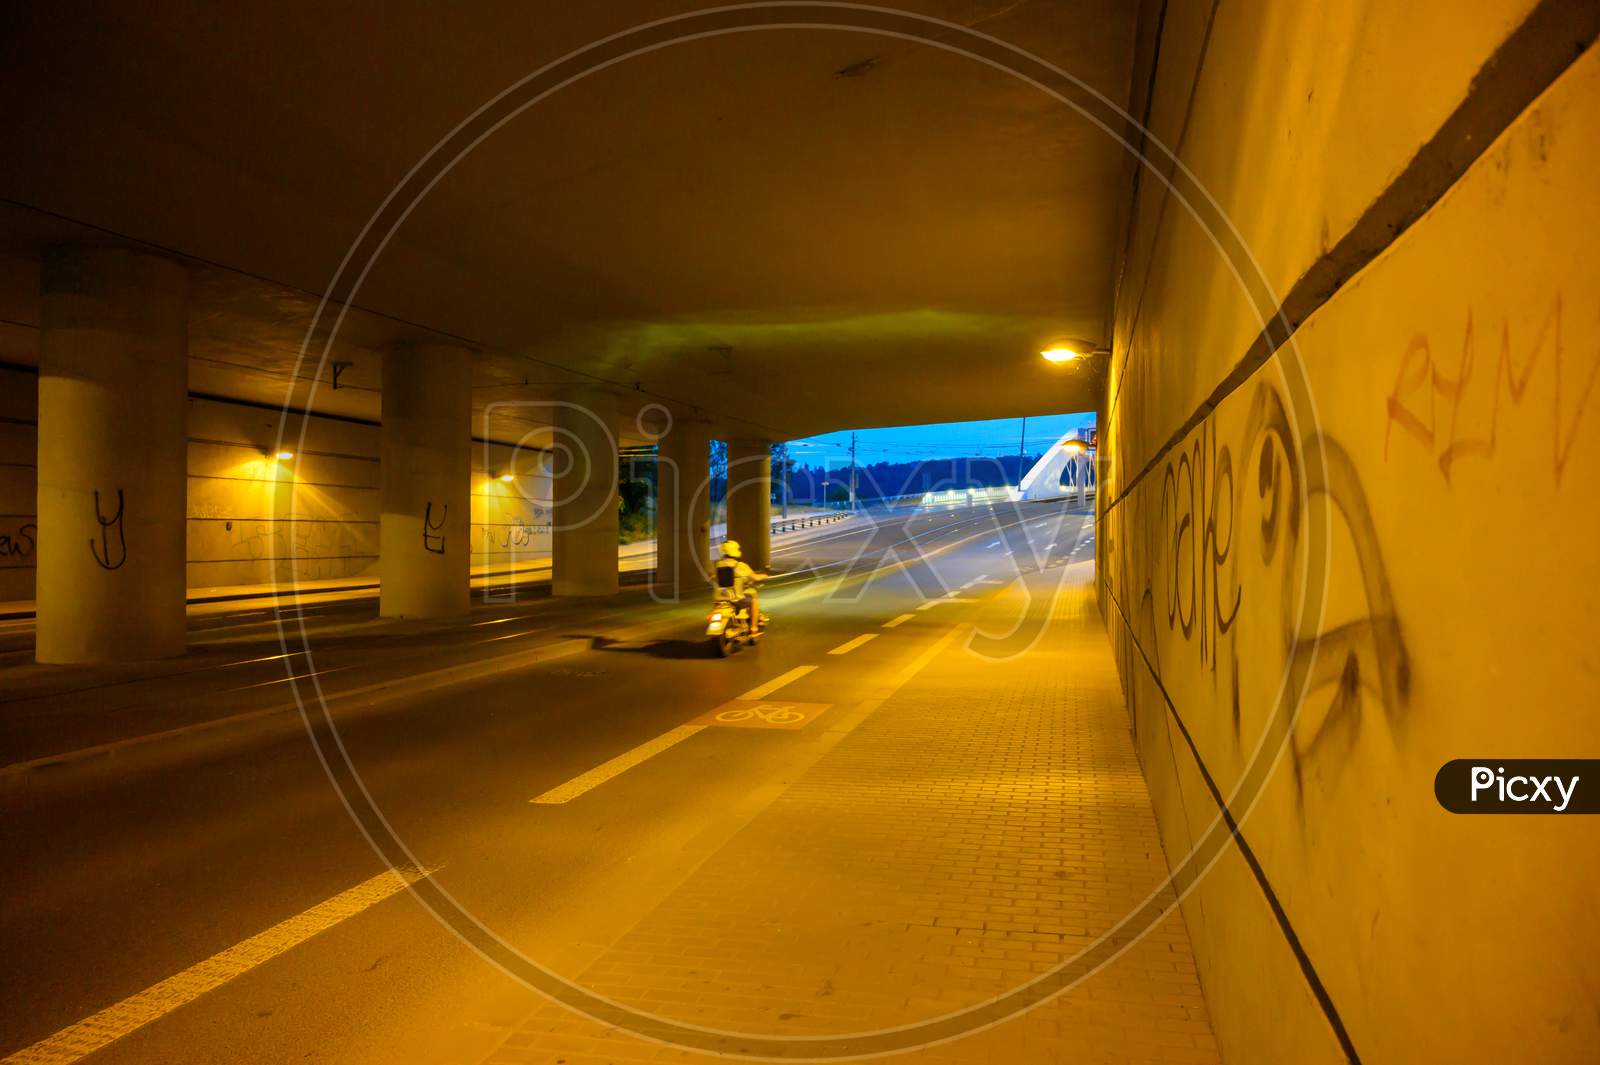 A Motioned Blurred Motor Scooter Travels Along A City Underpass At Night